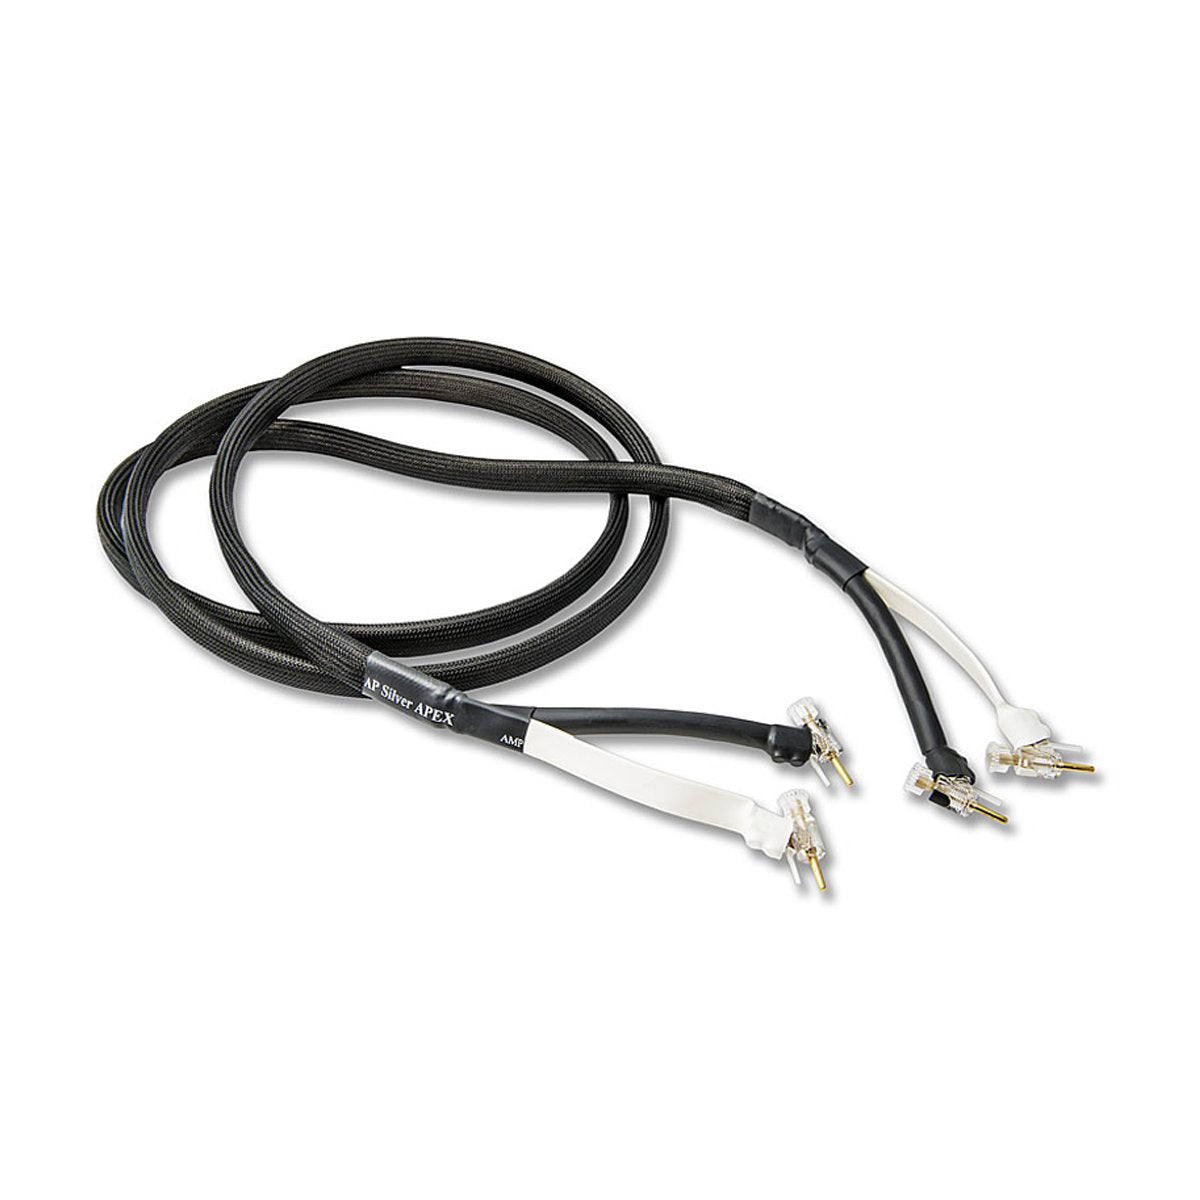 Analysis Plus Silver Apex Speaker Cable - The Audio Experts